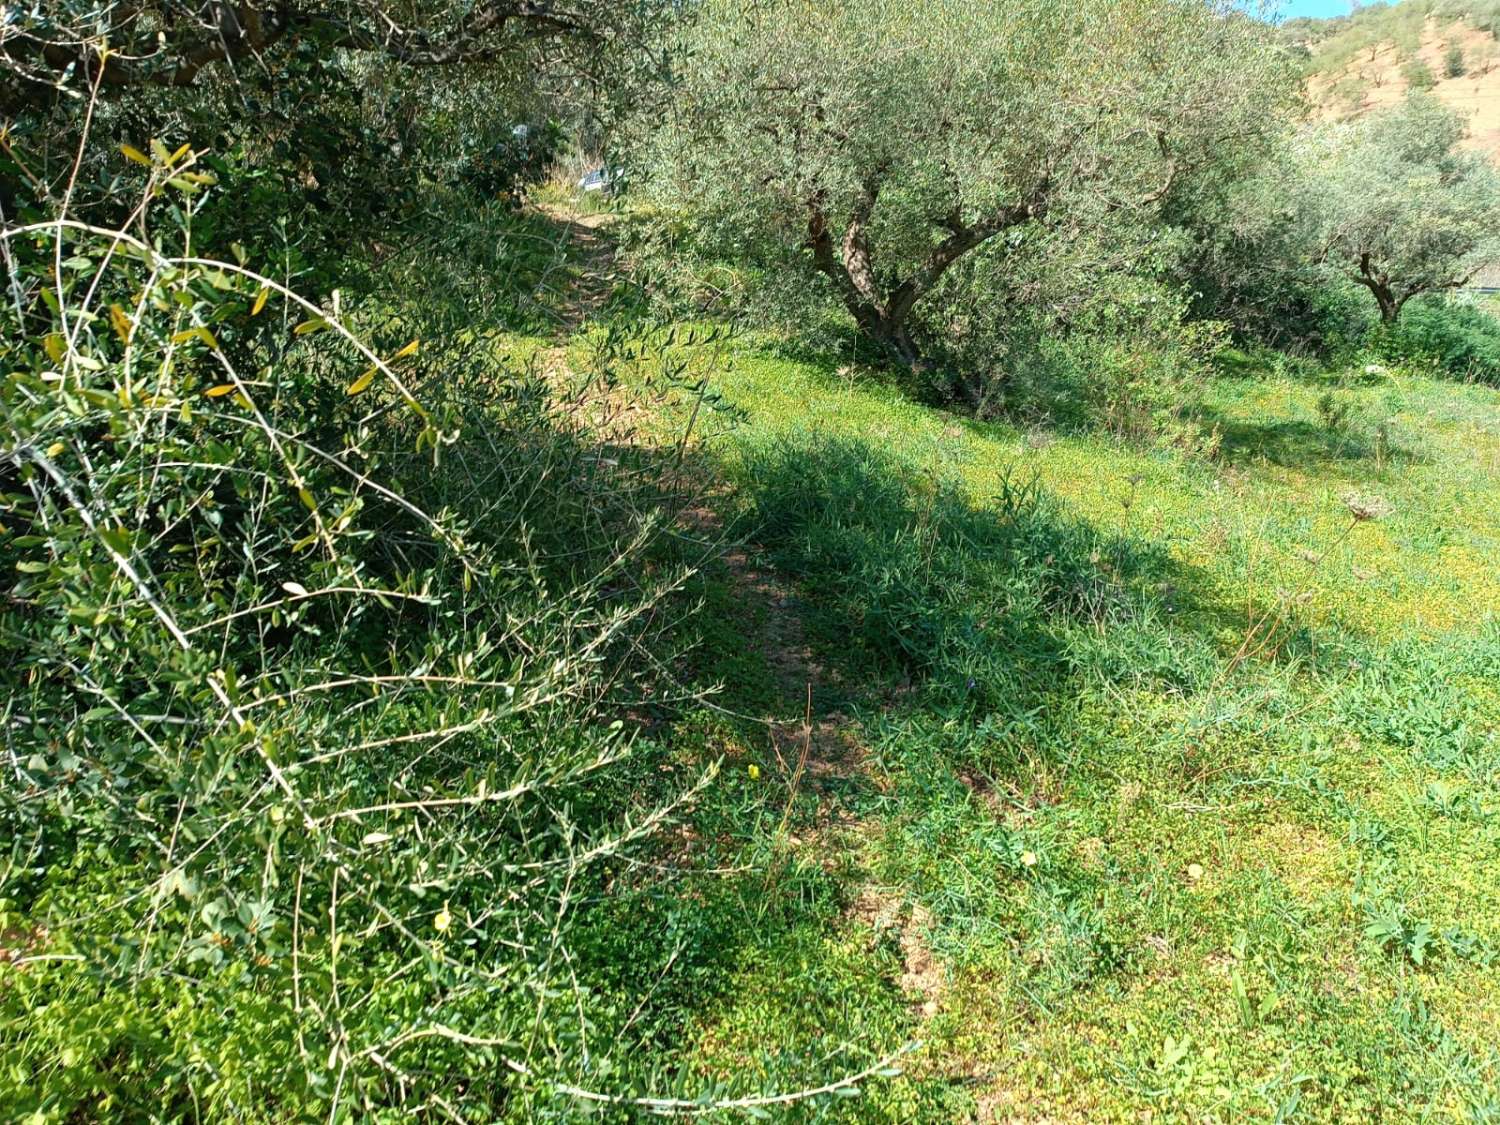 Enolias plot with olive trees